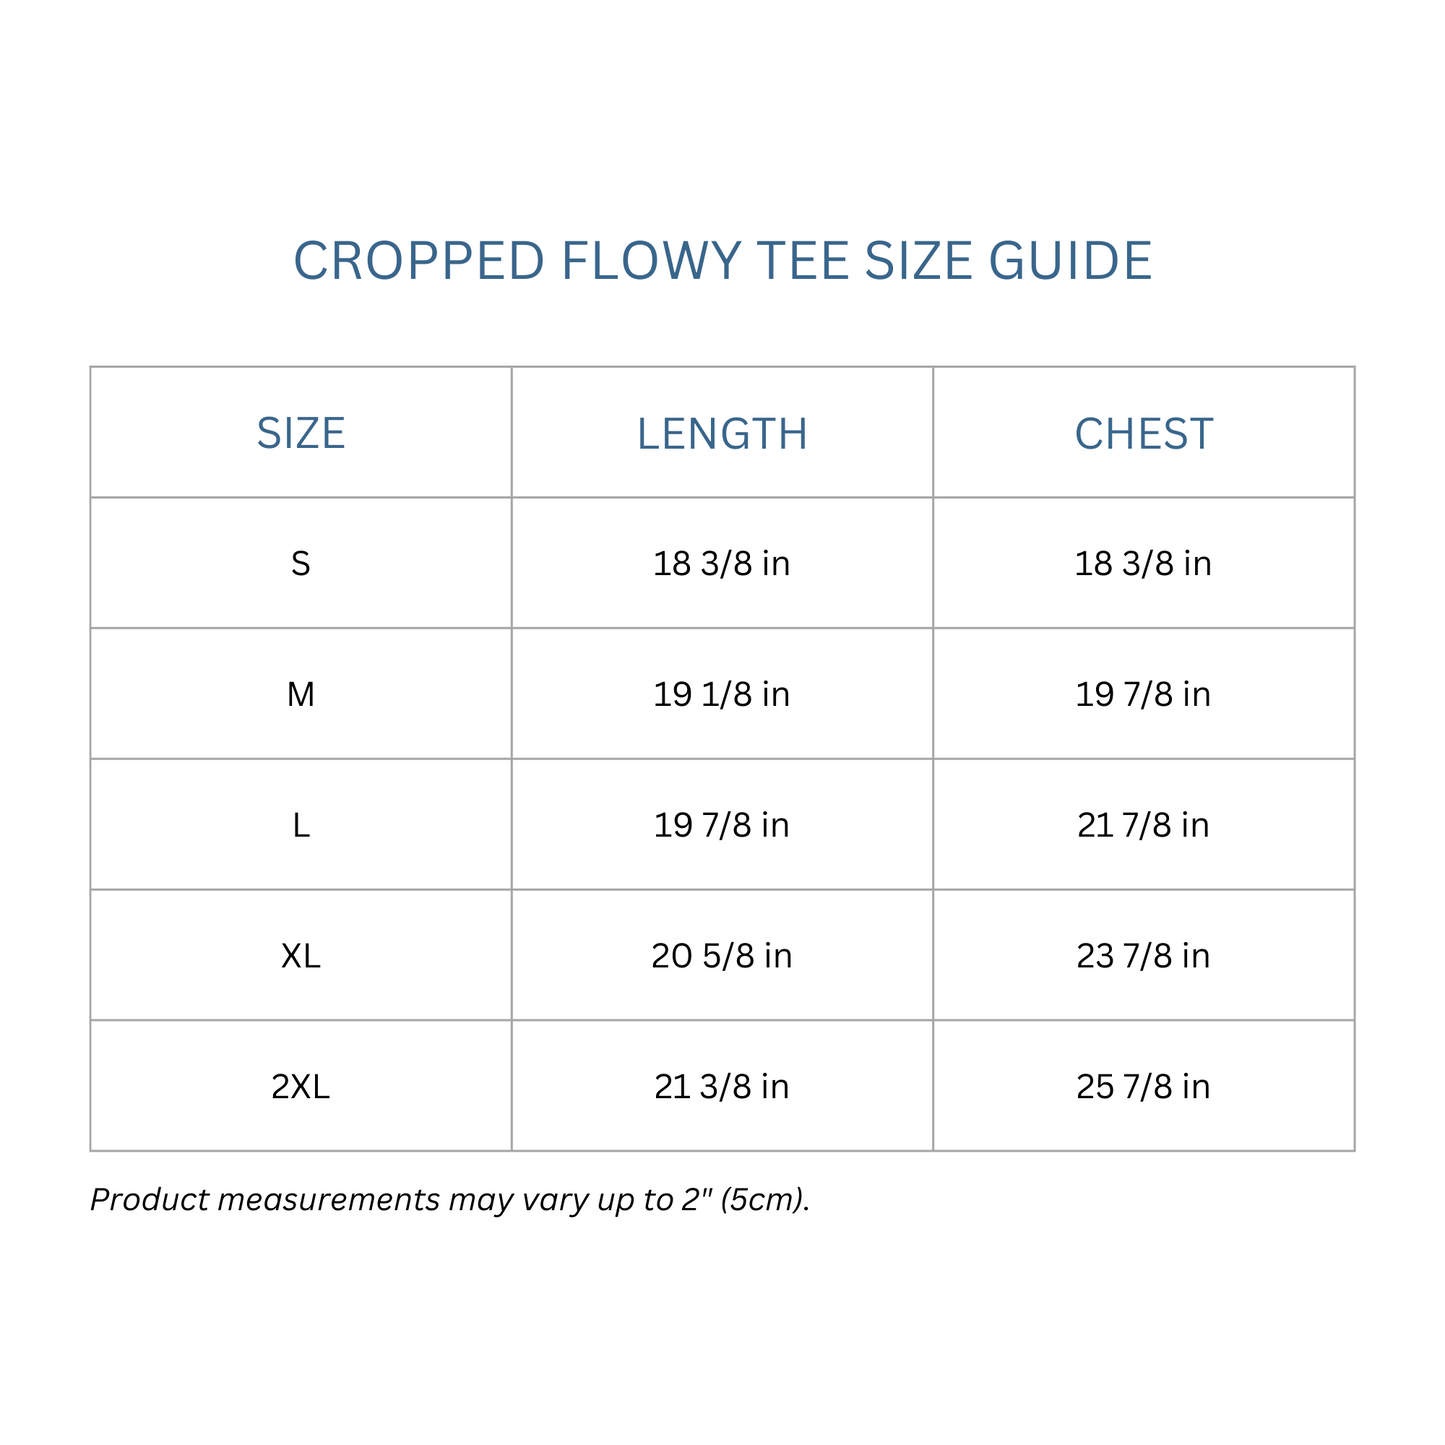 Totes Manila Co size guide for cropped flowy tee